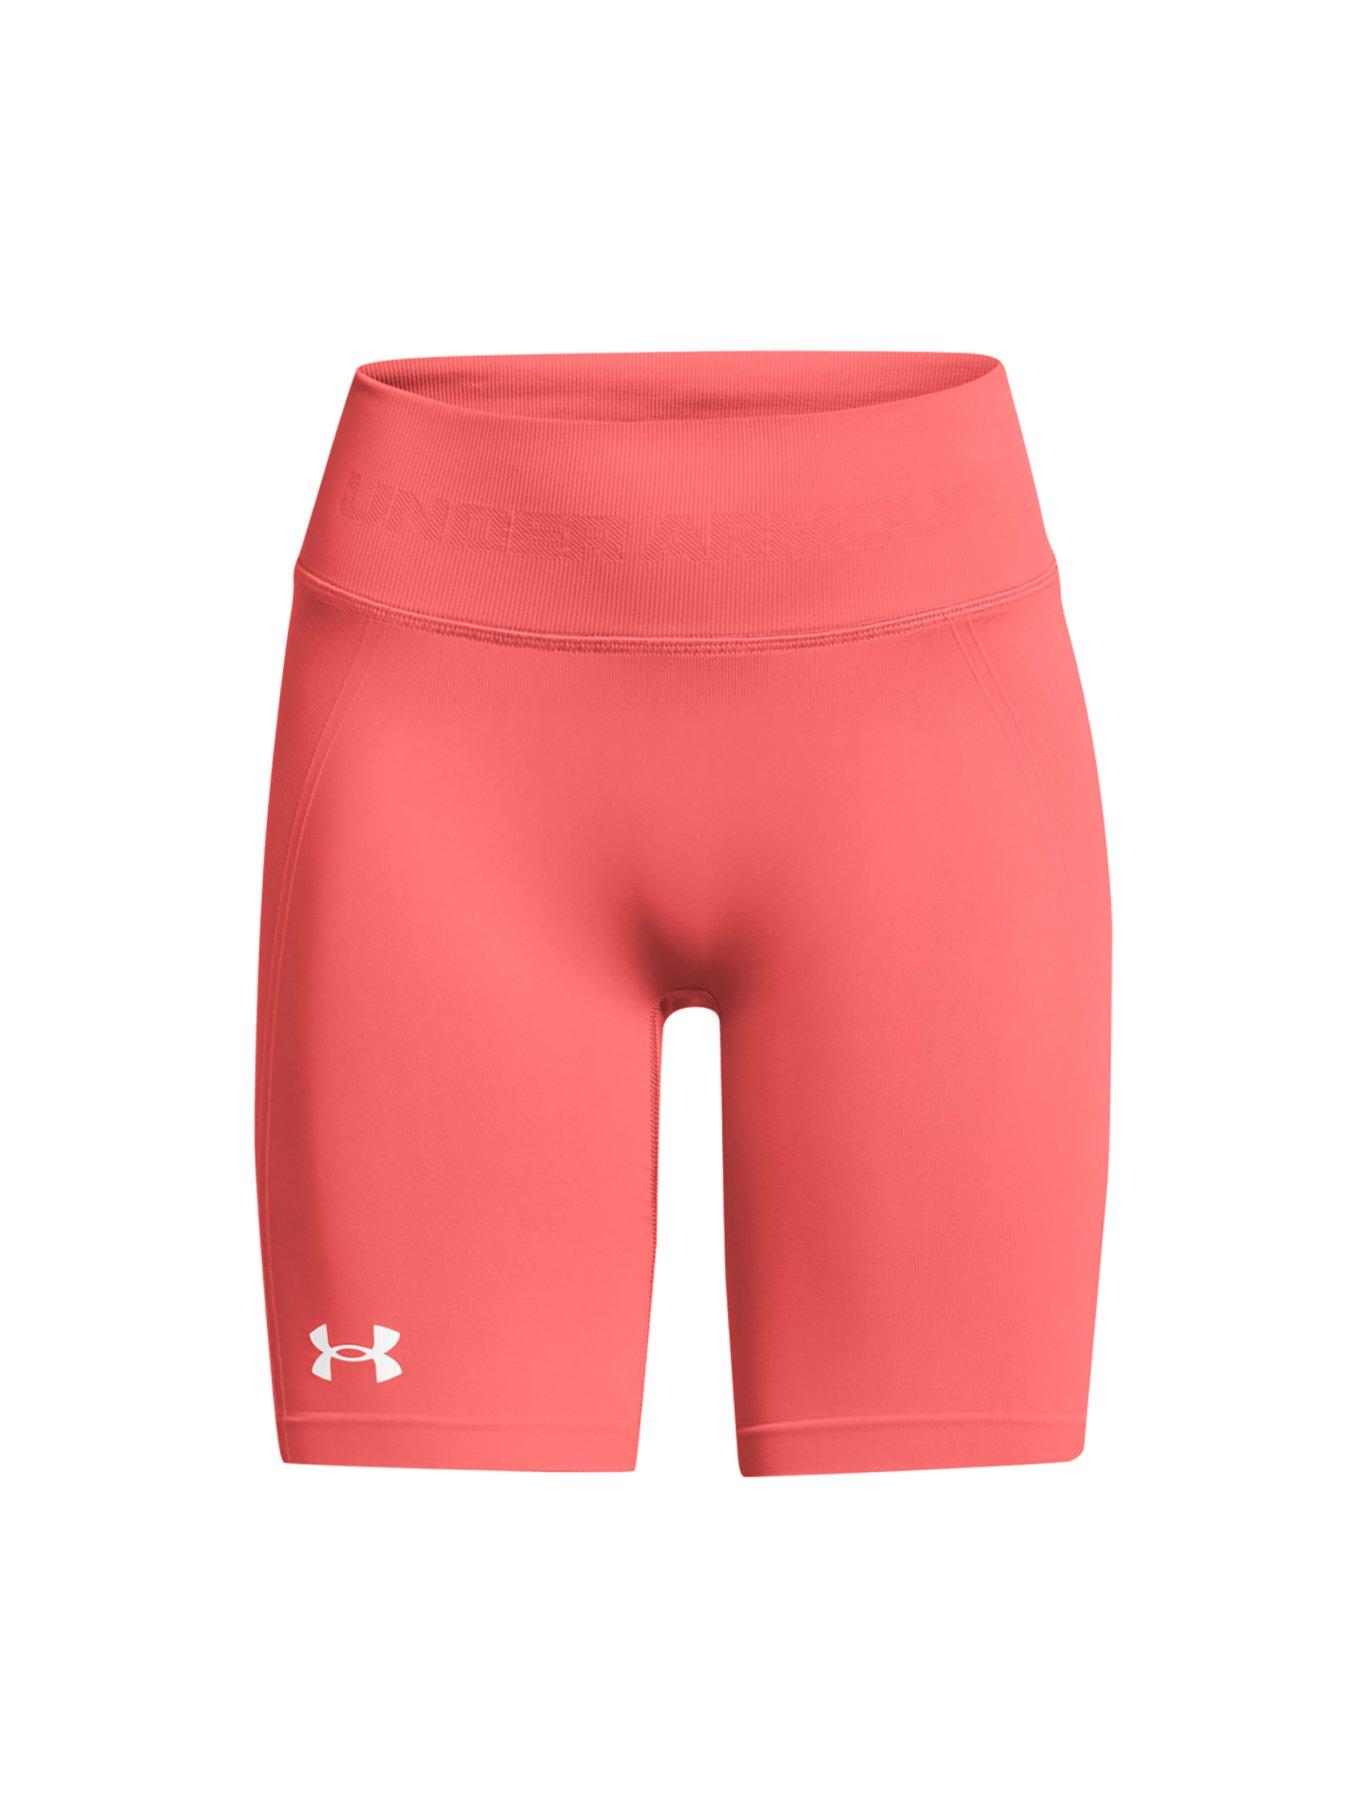 Under armour, Shorts, Womens sports clothing